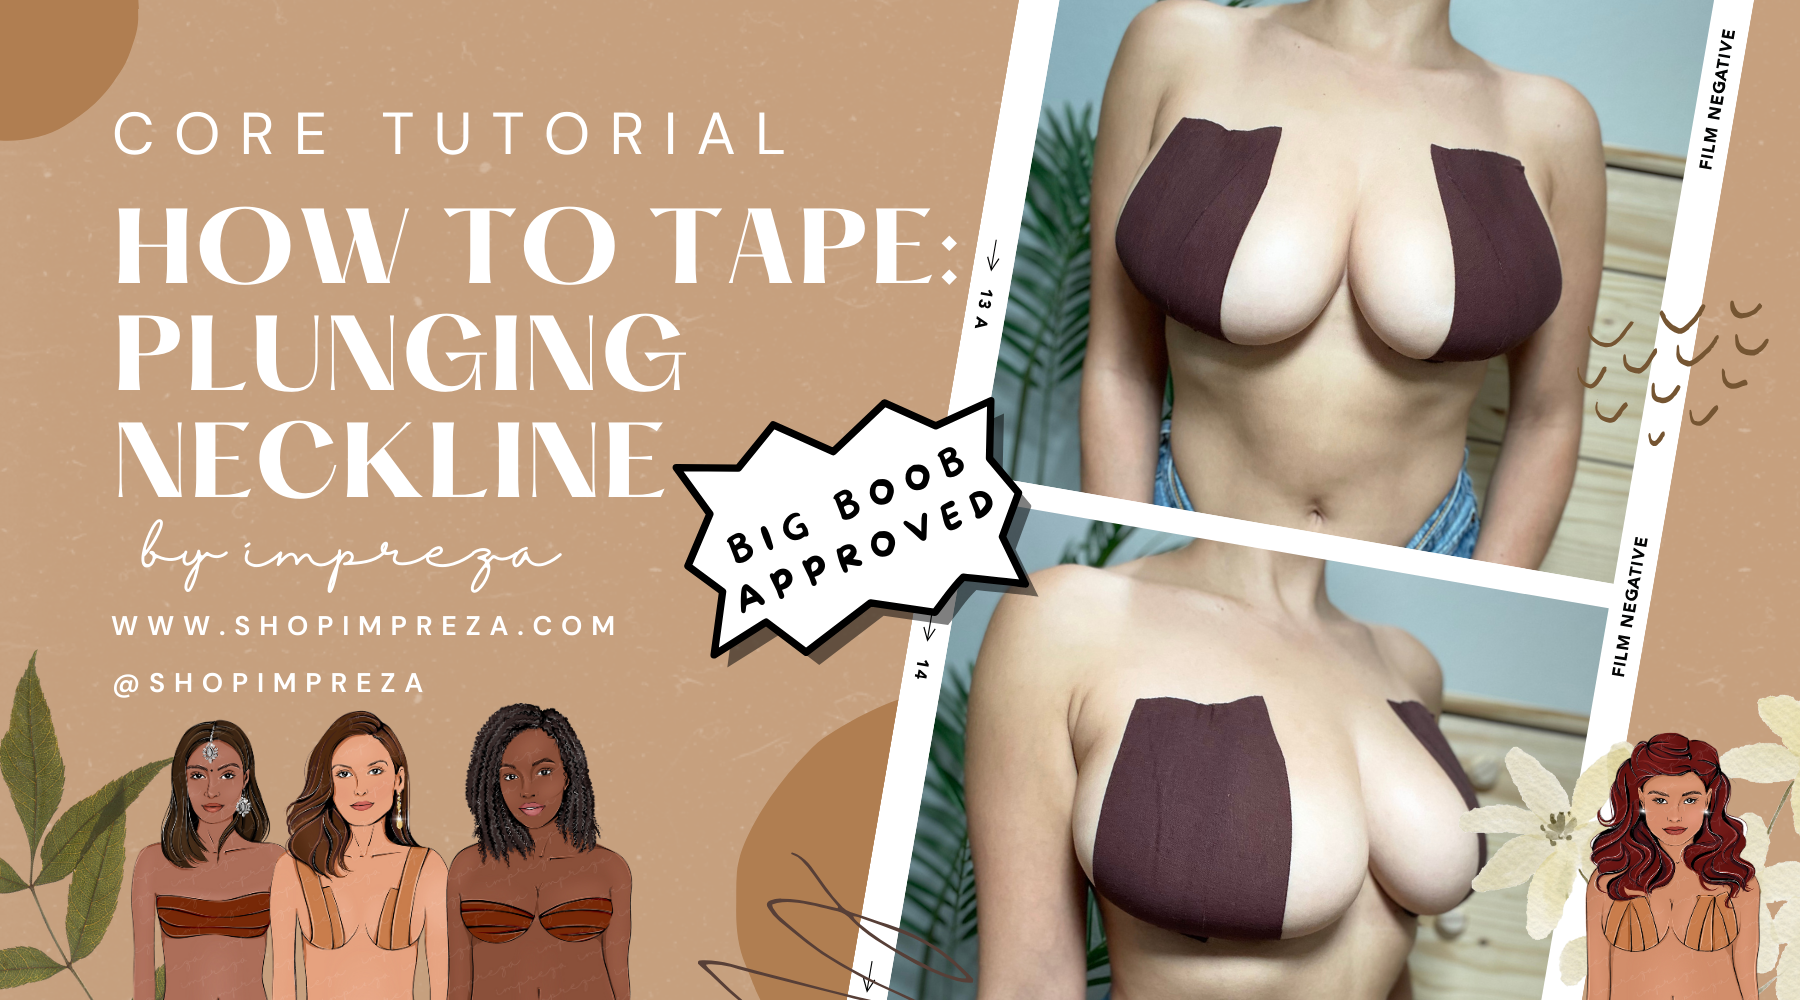 Tutorial for Using IMPREZA Breast & Body Tape with Plunging Neckline.